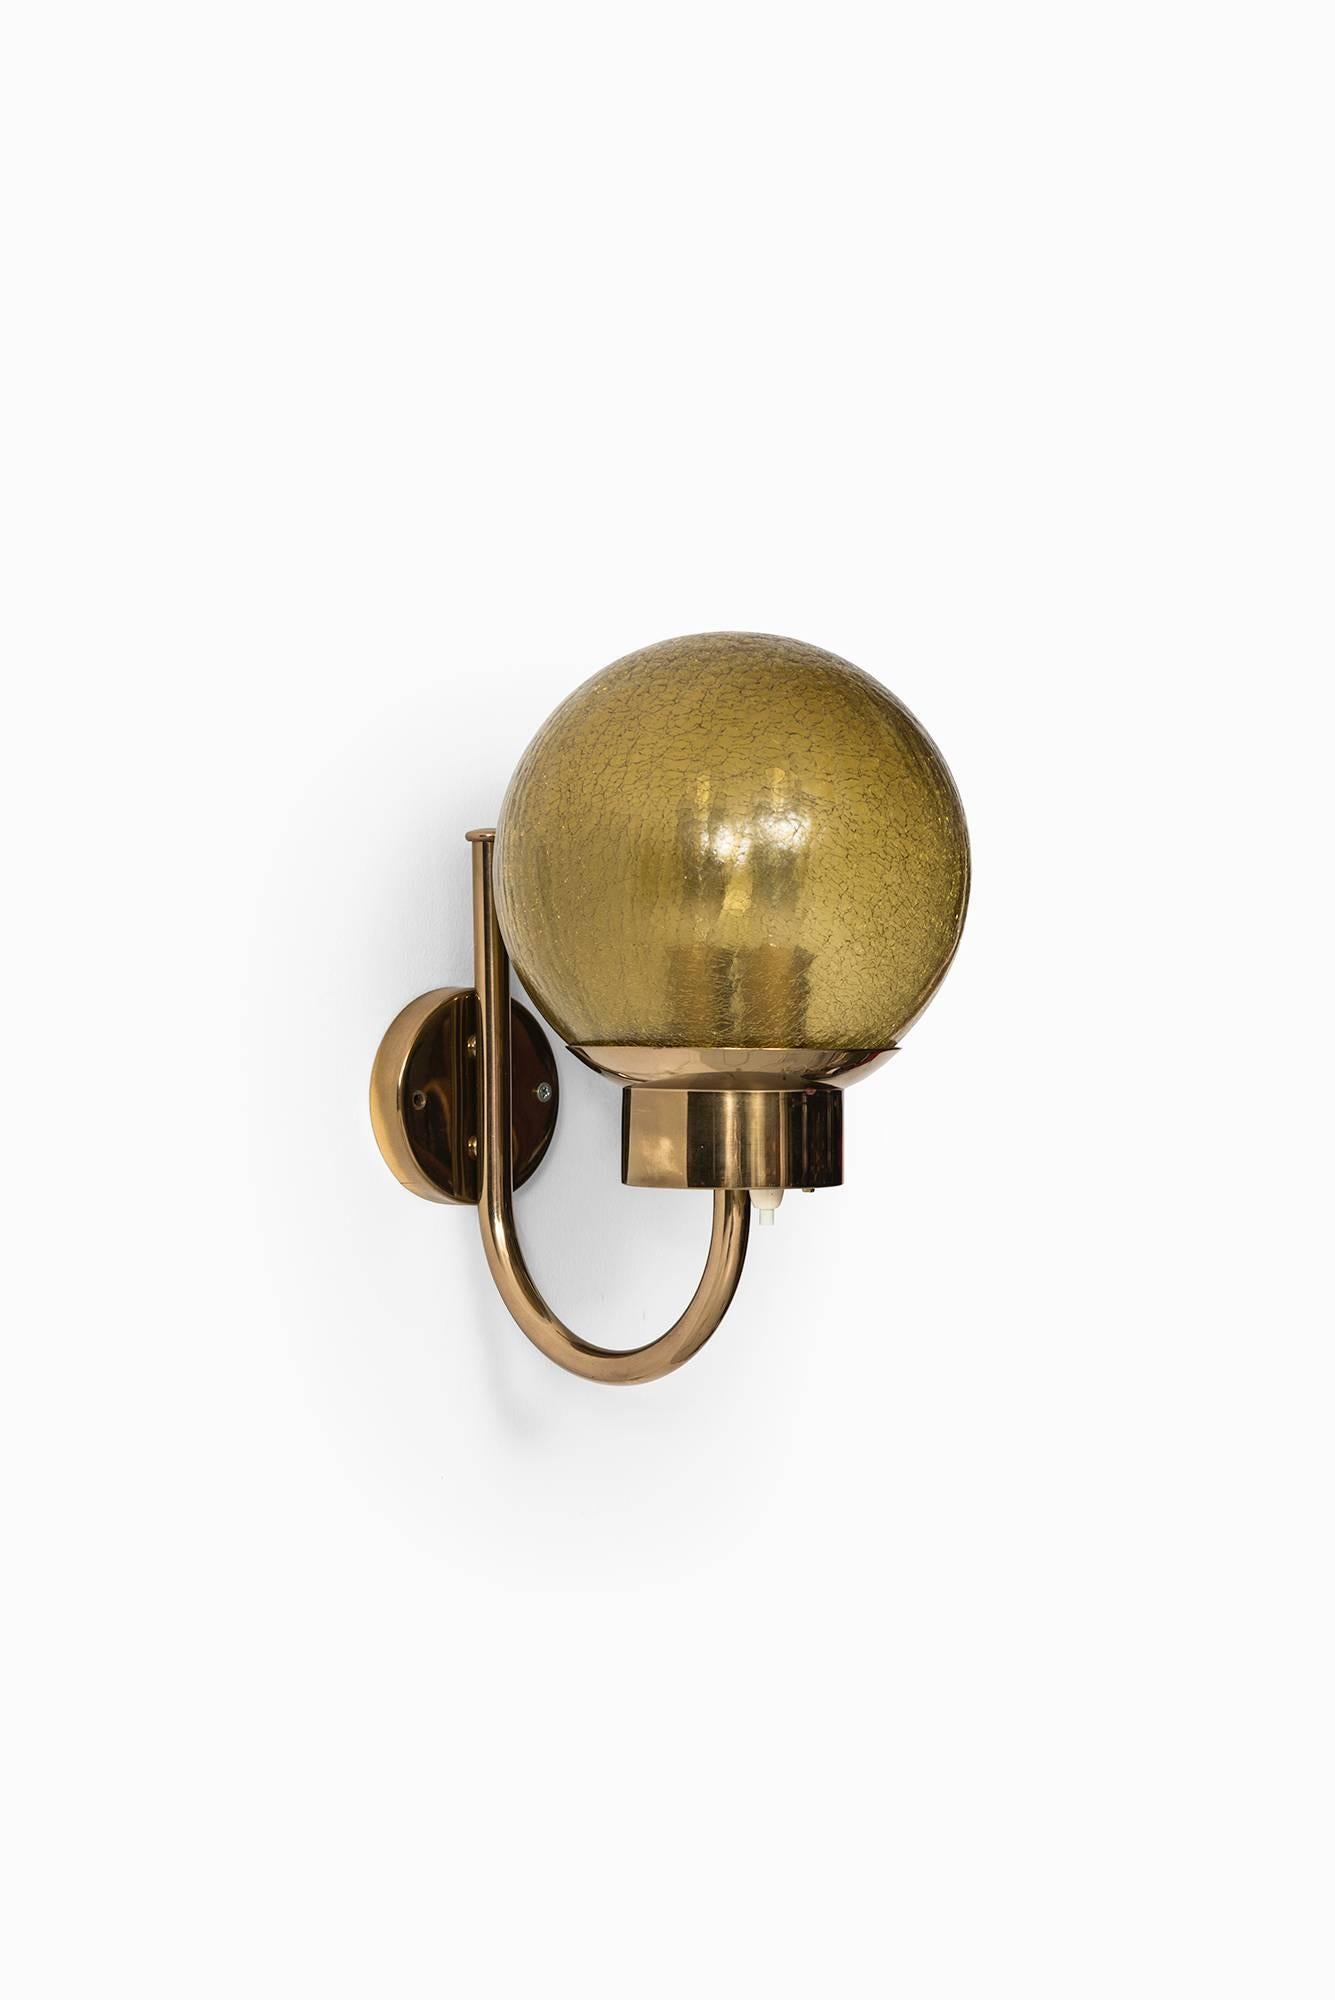 Pair of wall lamps model V-118 in brass and glass. Produced by Bergboms in Sweden.